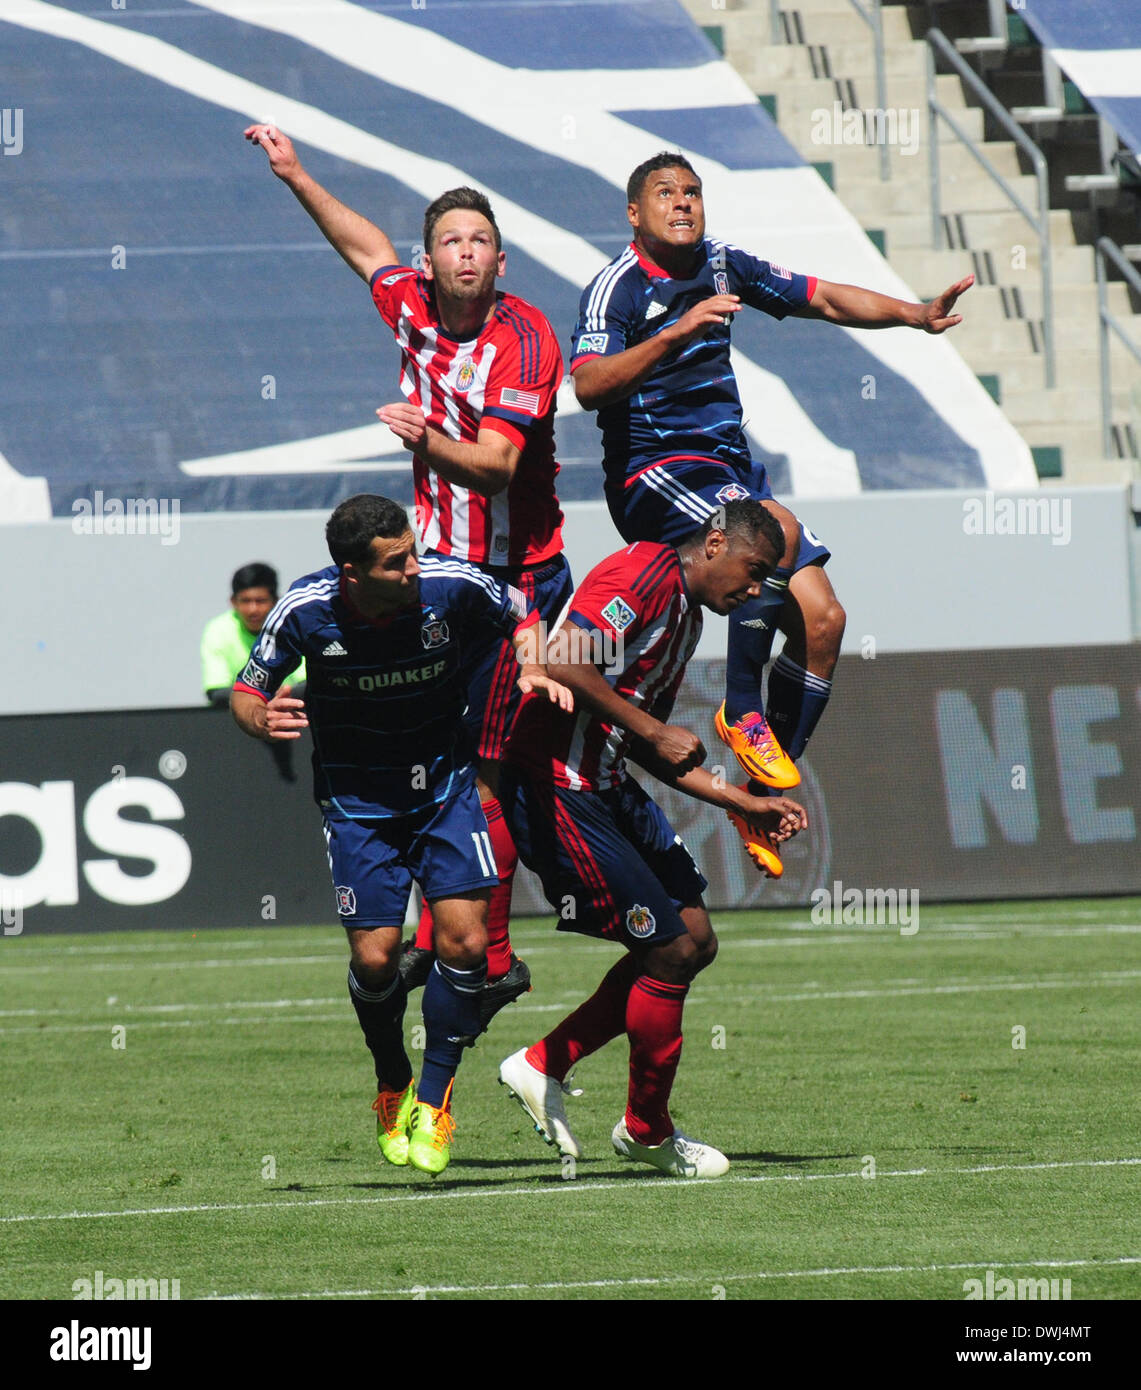 Carson, California, USA. 9th Mar, 2014. Major League Soccer-MLS- Chivas USA defenders OSWALDO MINDA and BOBBY BURLING (top left) fight Chicago Fire forward QUINCY AMARIKWA and mid fielder DILLY DUKA (bottom left) to control a head ball as Chivas USA went on to win the match 3 to 2 at the Stubhub Center, Carson, California, USA, March 9, 2013. This was the season opener for Chivas USA and the first win for their new coach.Credit Image cr Scott Mitchell/ZUMA Press © Scott Mitchell/ZUMAPRESS.com/Alamy Live News Stock Photo